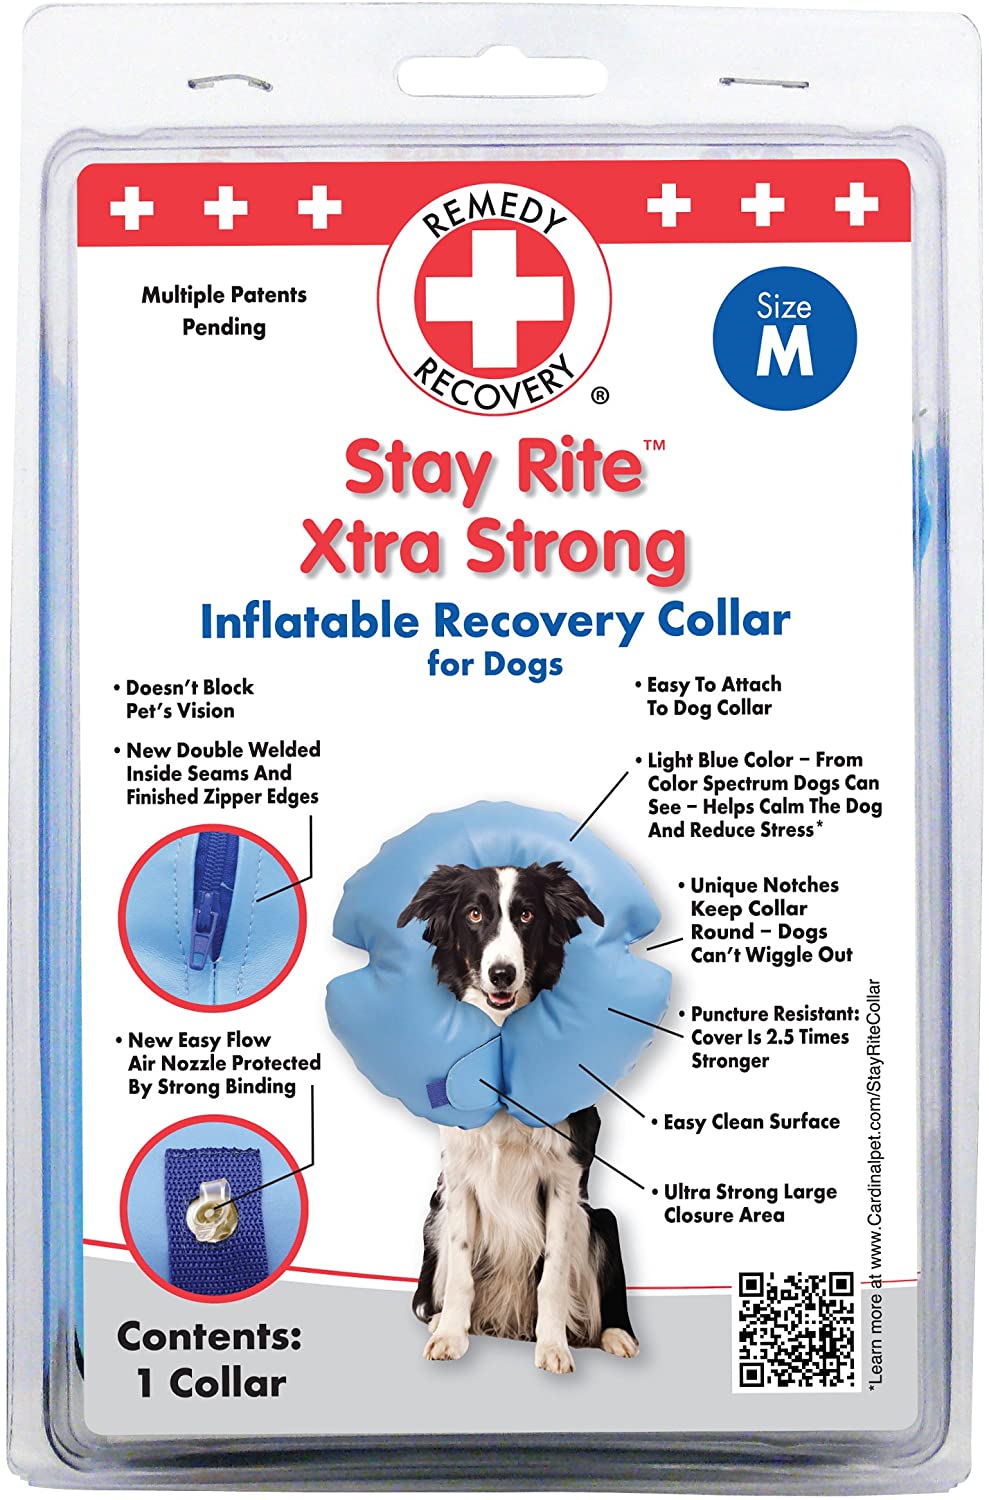 Cardinal Remedy Plus Recovery Stay Rite Xtra Strong Inflatable Recovery Dog Collar